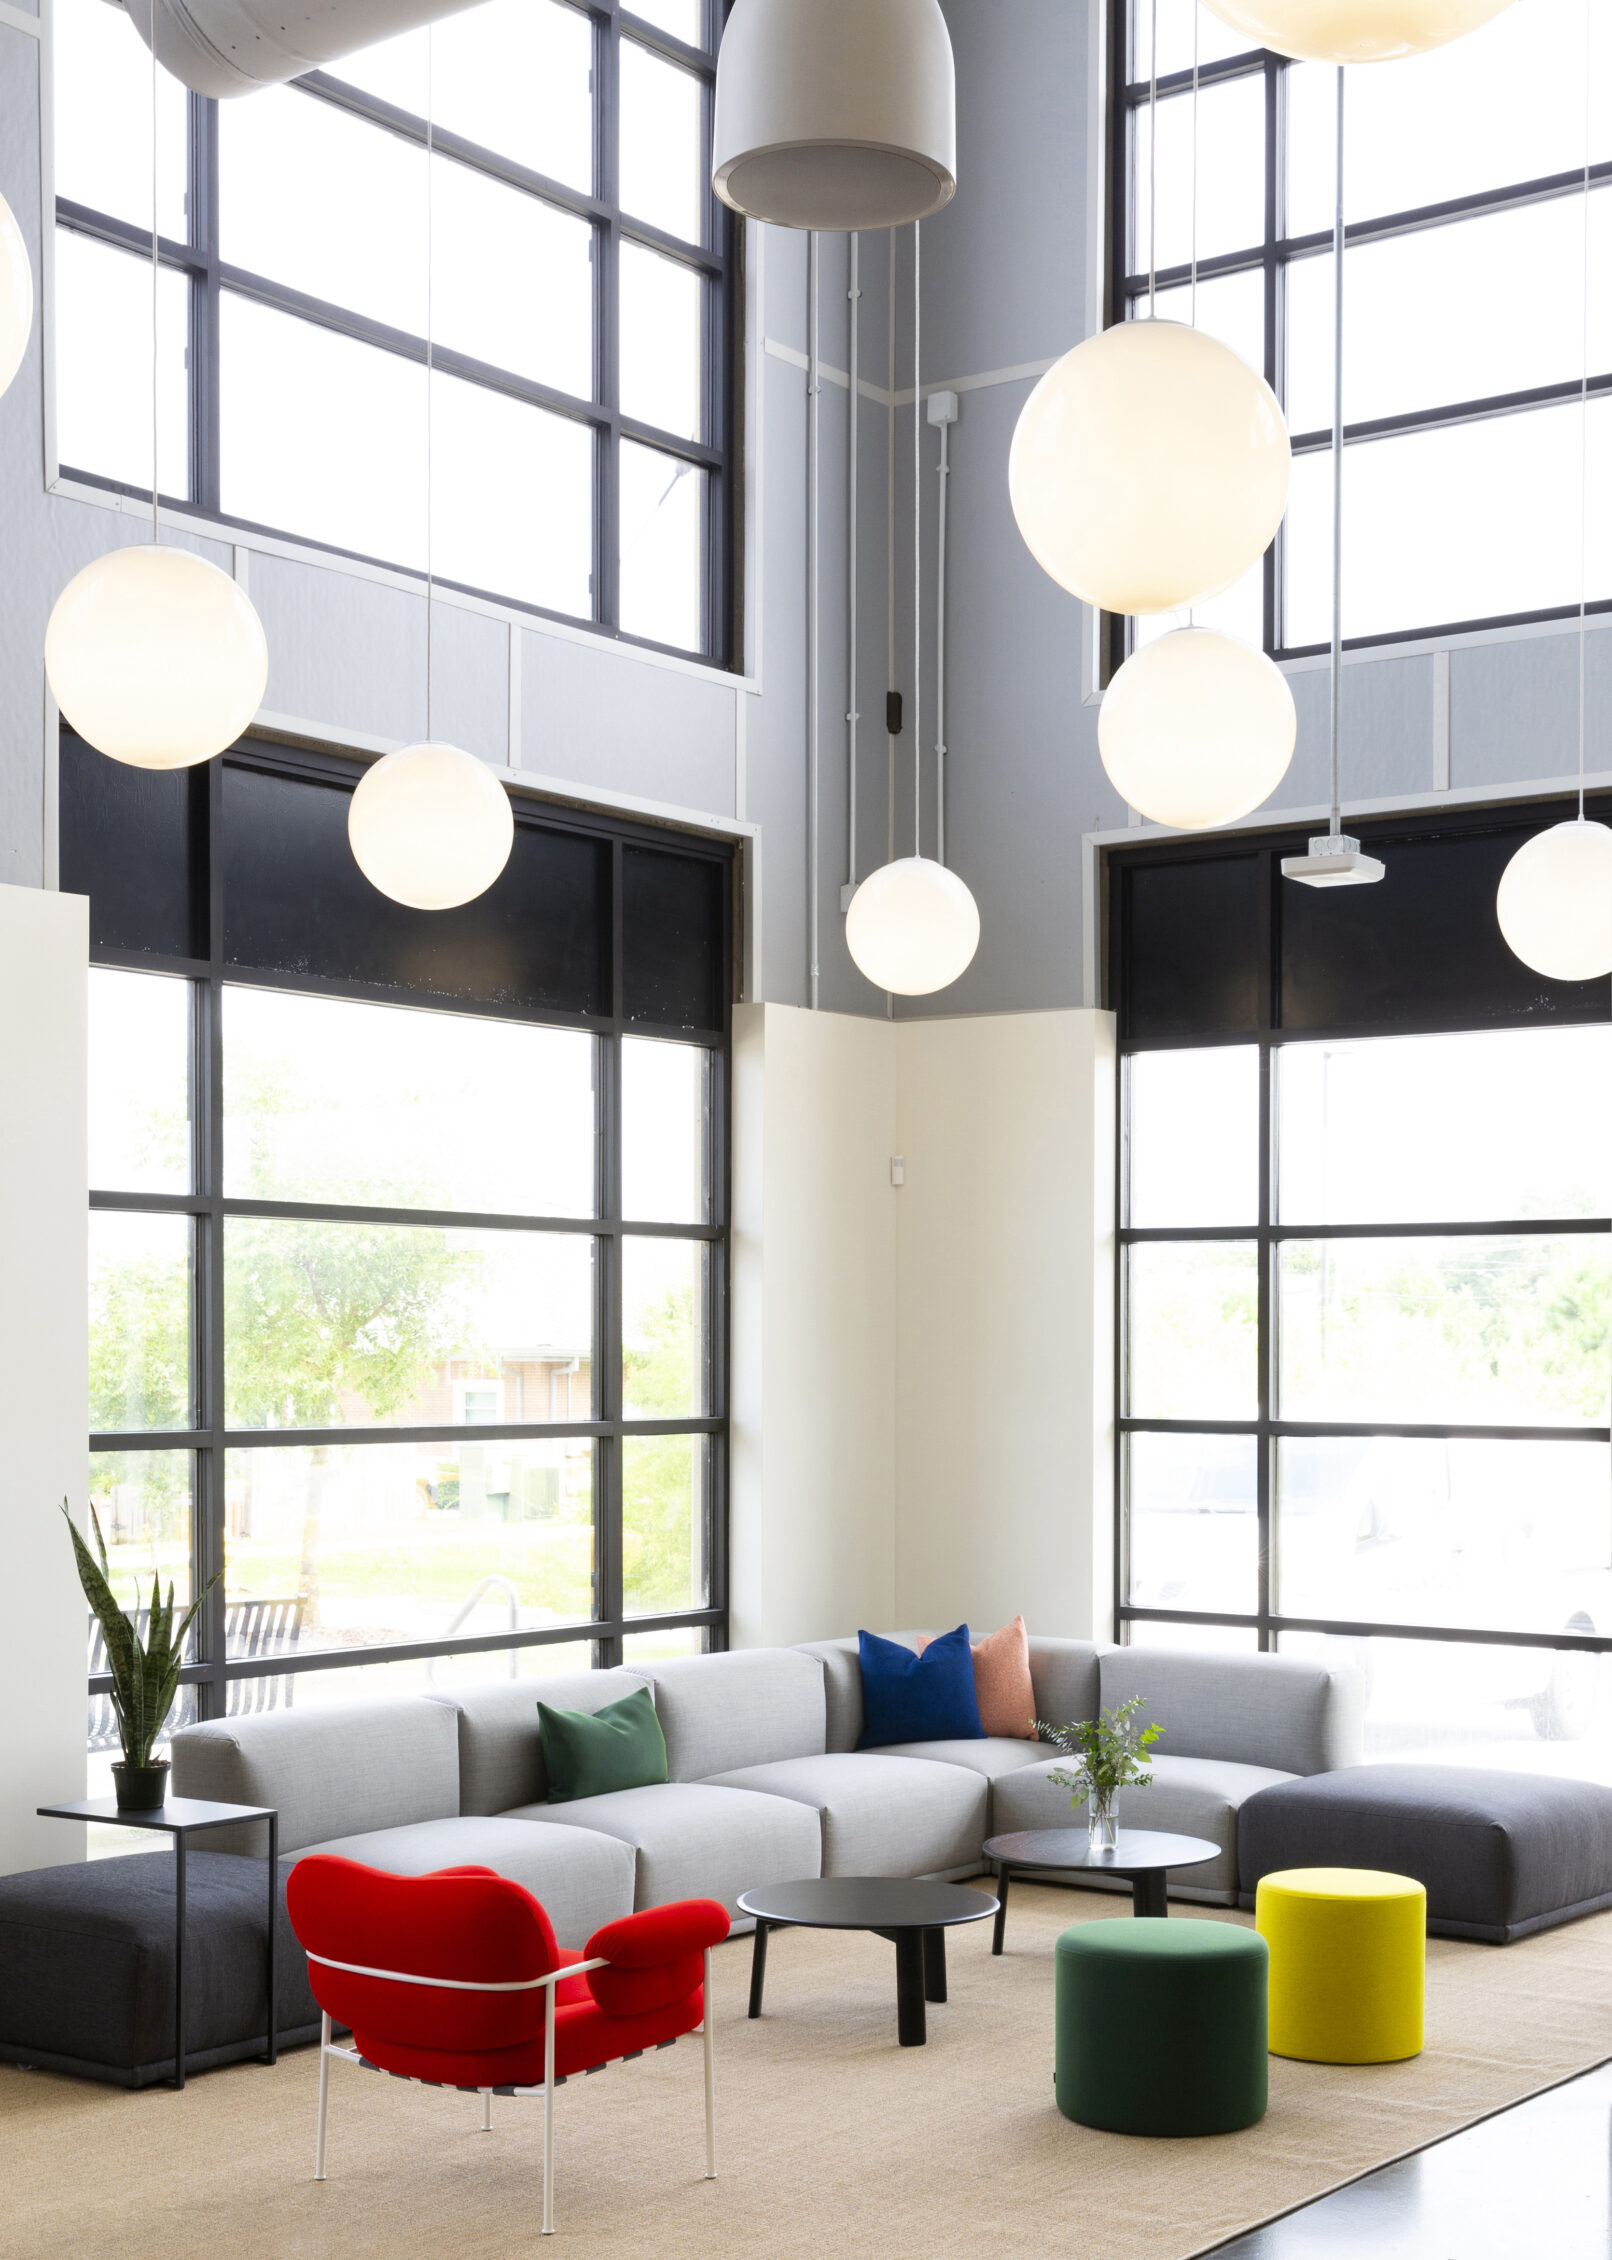 Interior of a commercial building with large windows, large round lighting and colorful furniture.